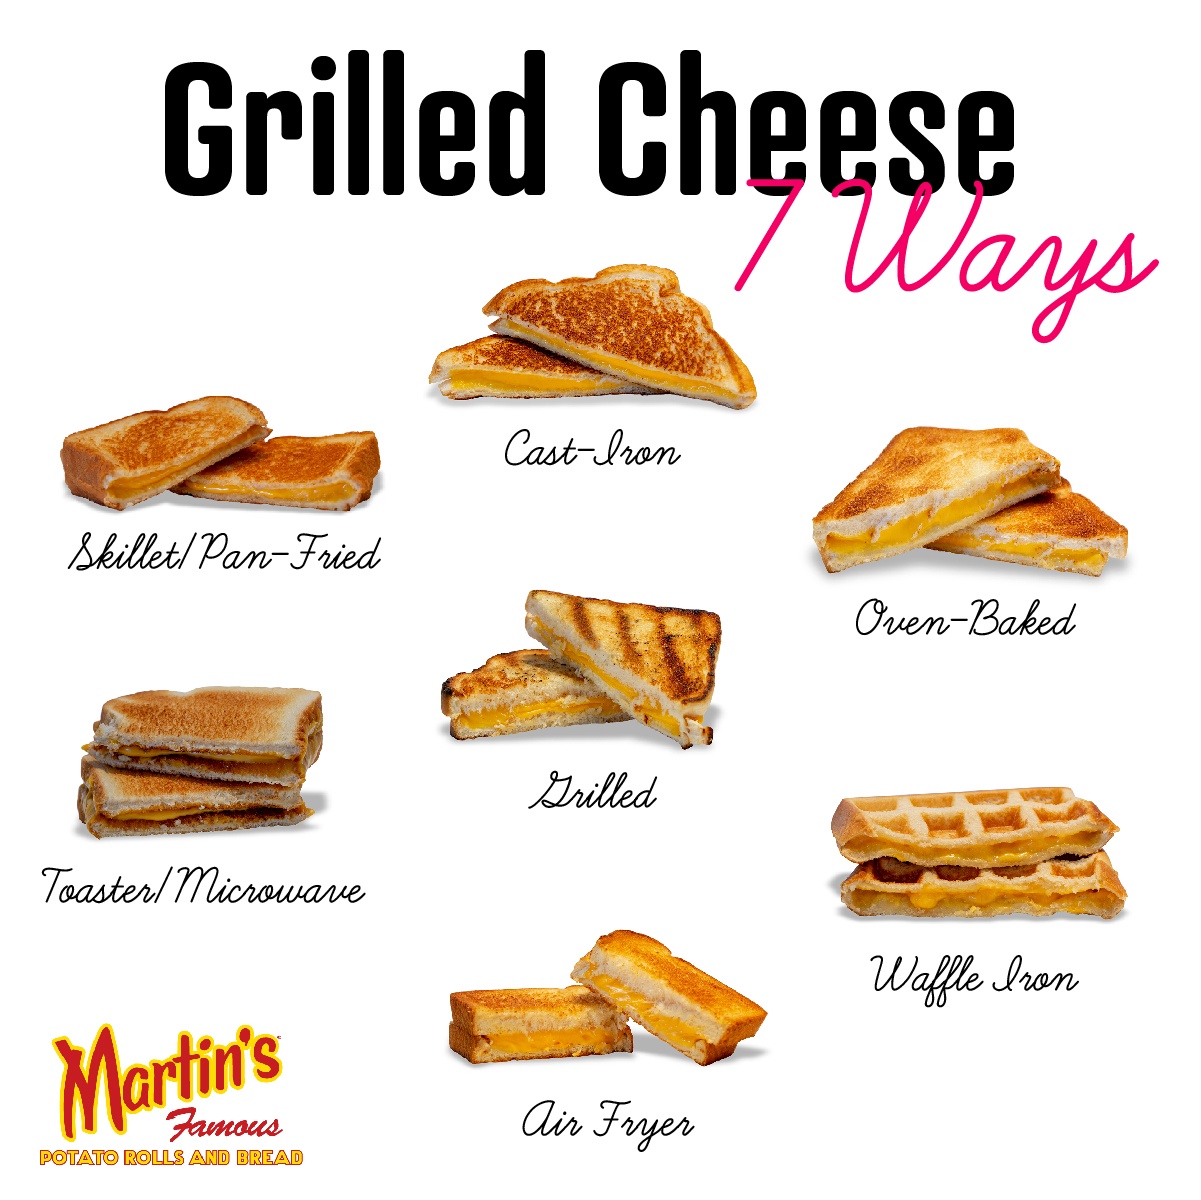 Grilled Cheese - 7 Ways (Infographic)